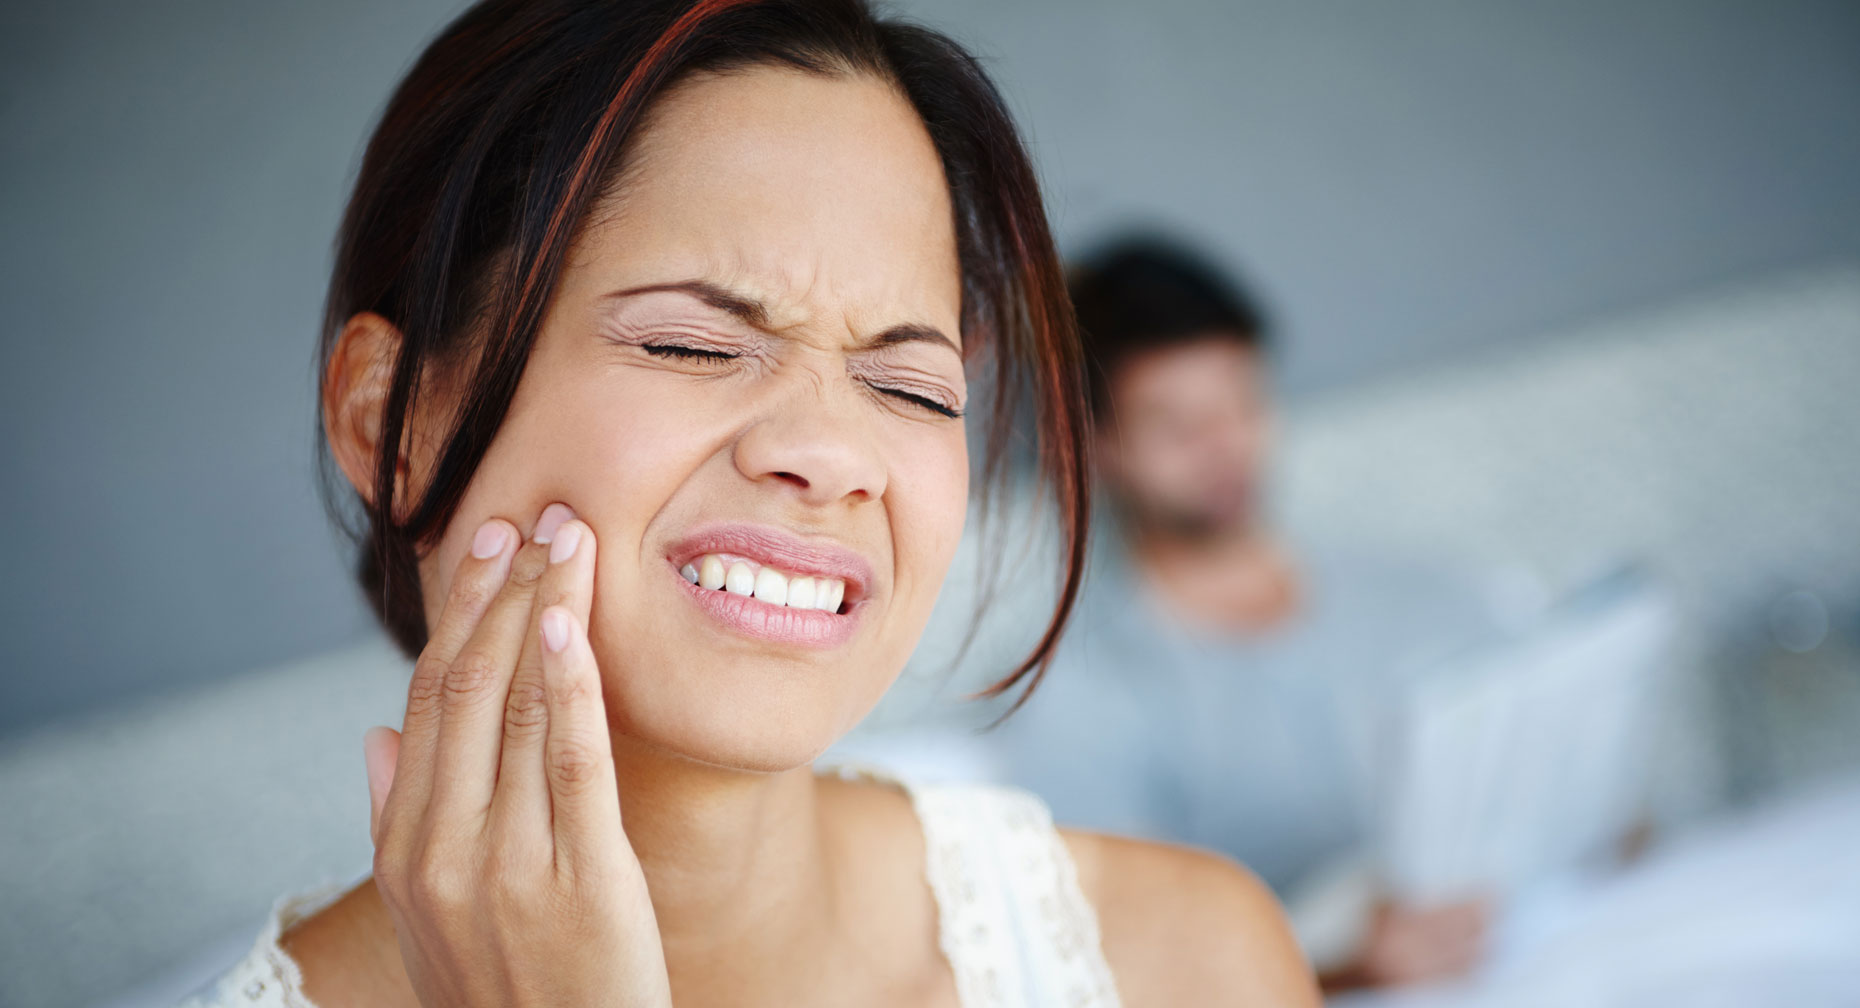 How to Relieve That Pain in Your Jaw - Large